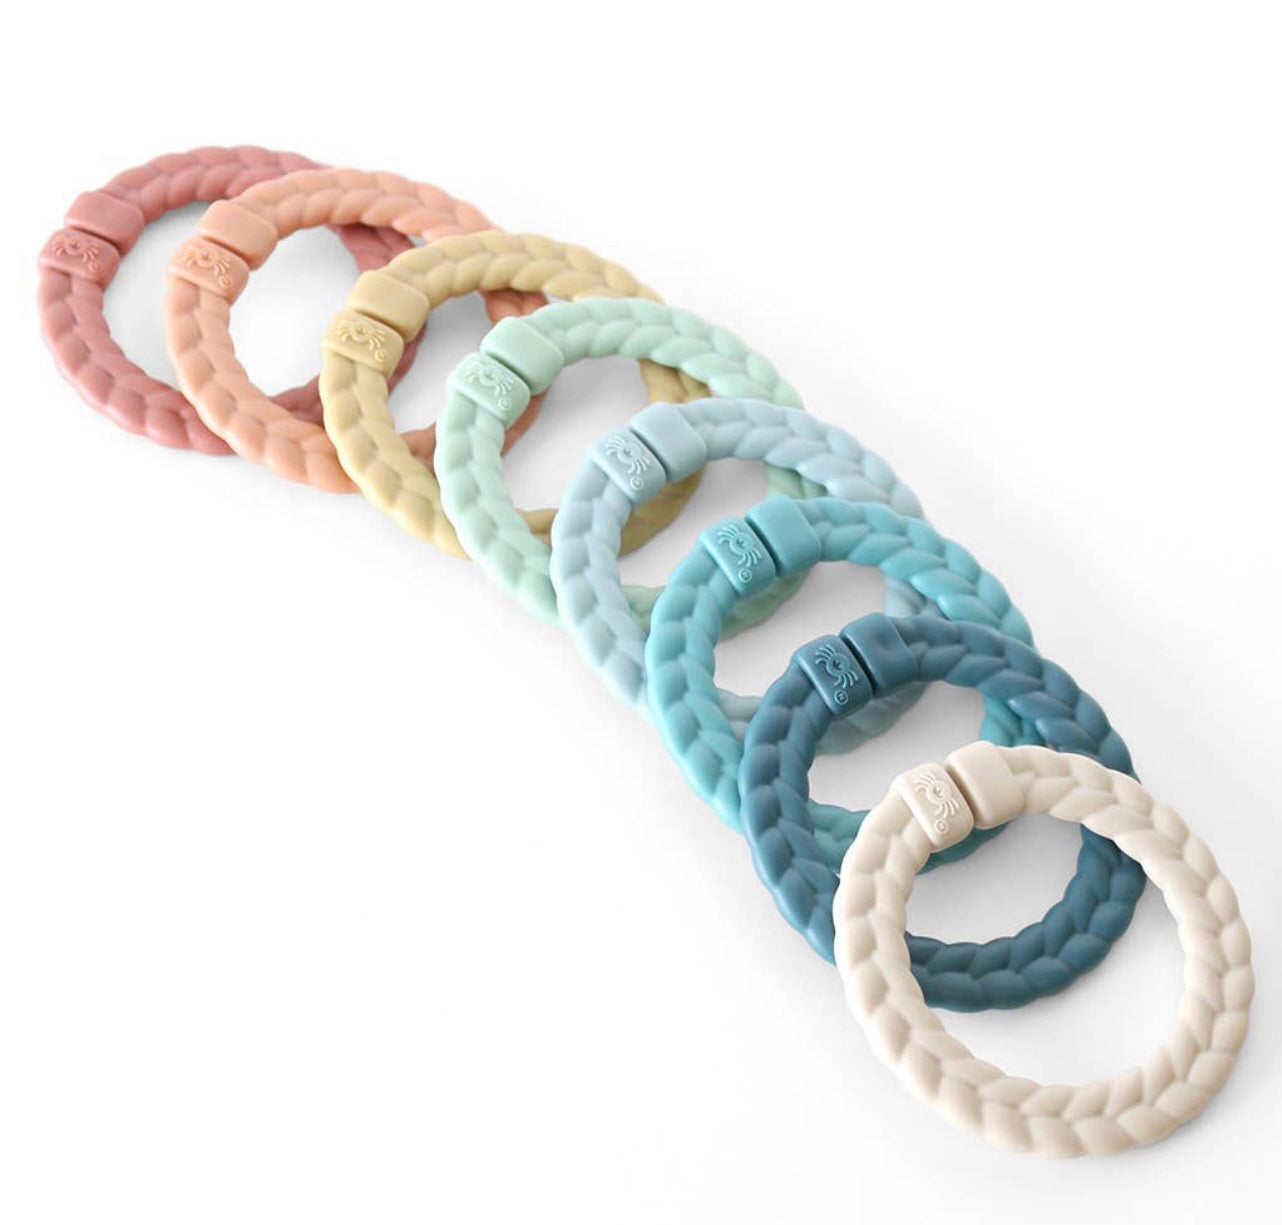 Linking Ring Set (2 colors)